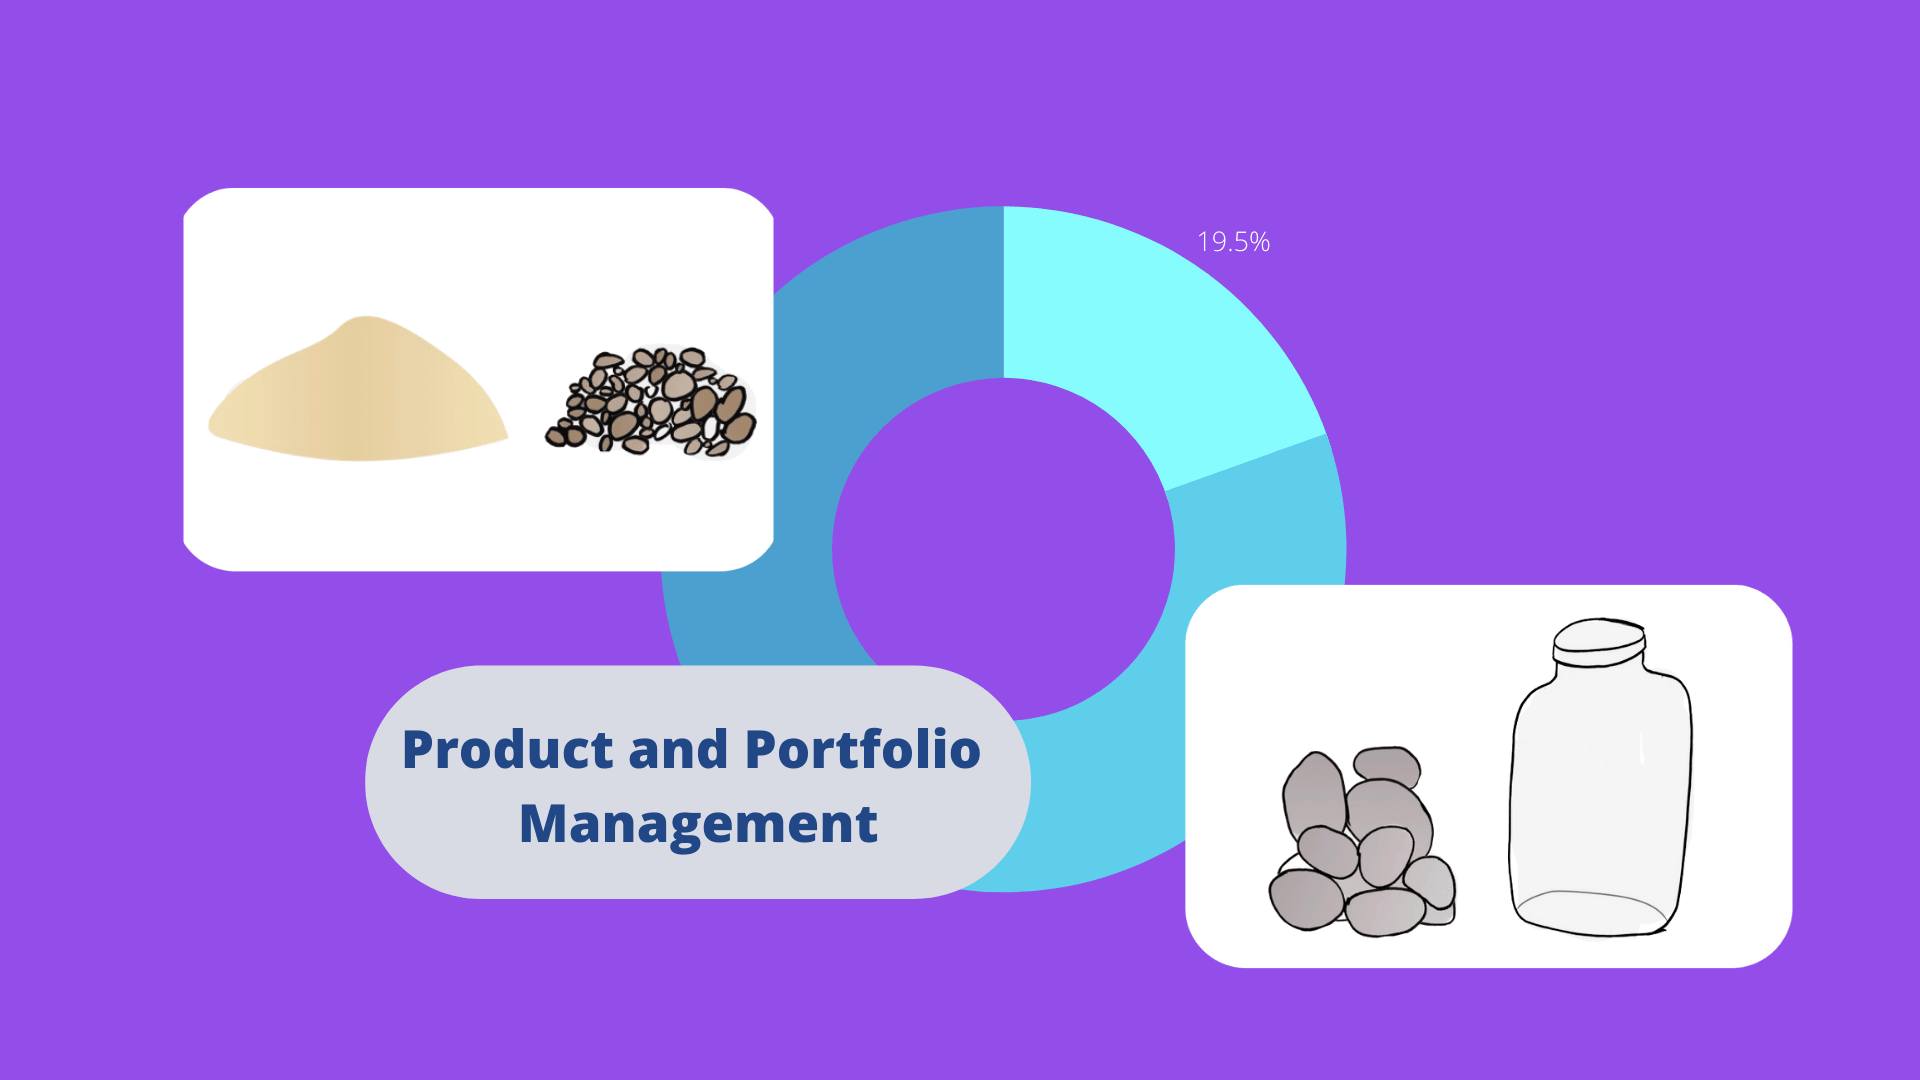 Rock, Pebble, and Sand Product and Portfolio Management